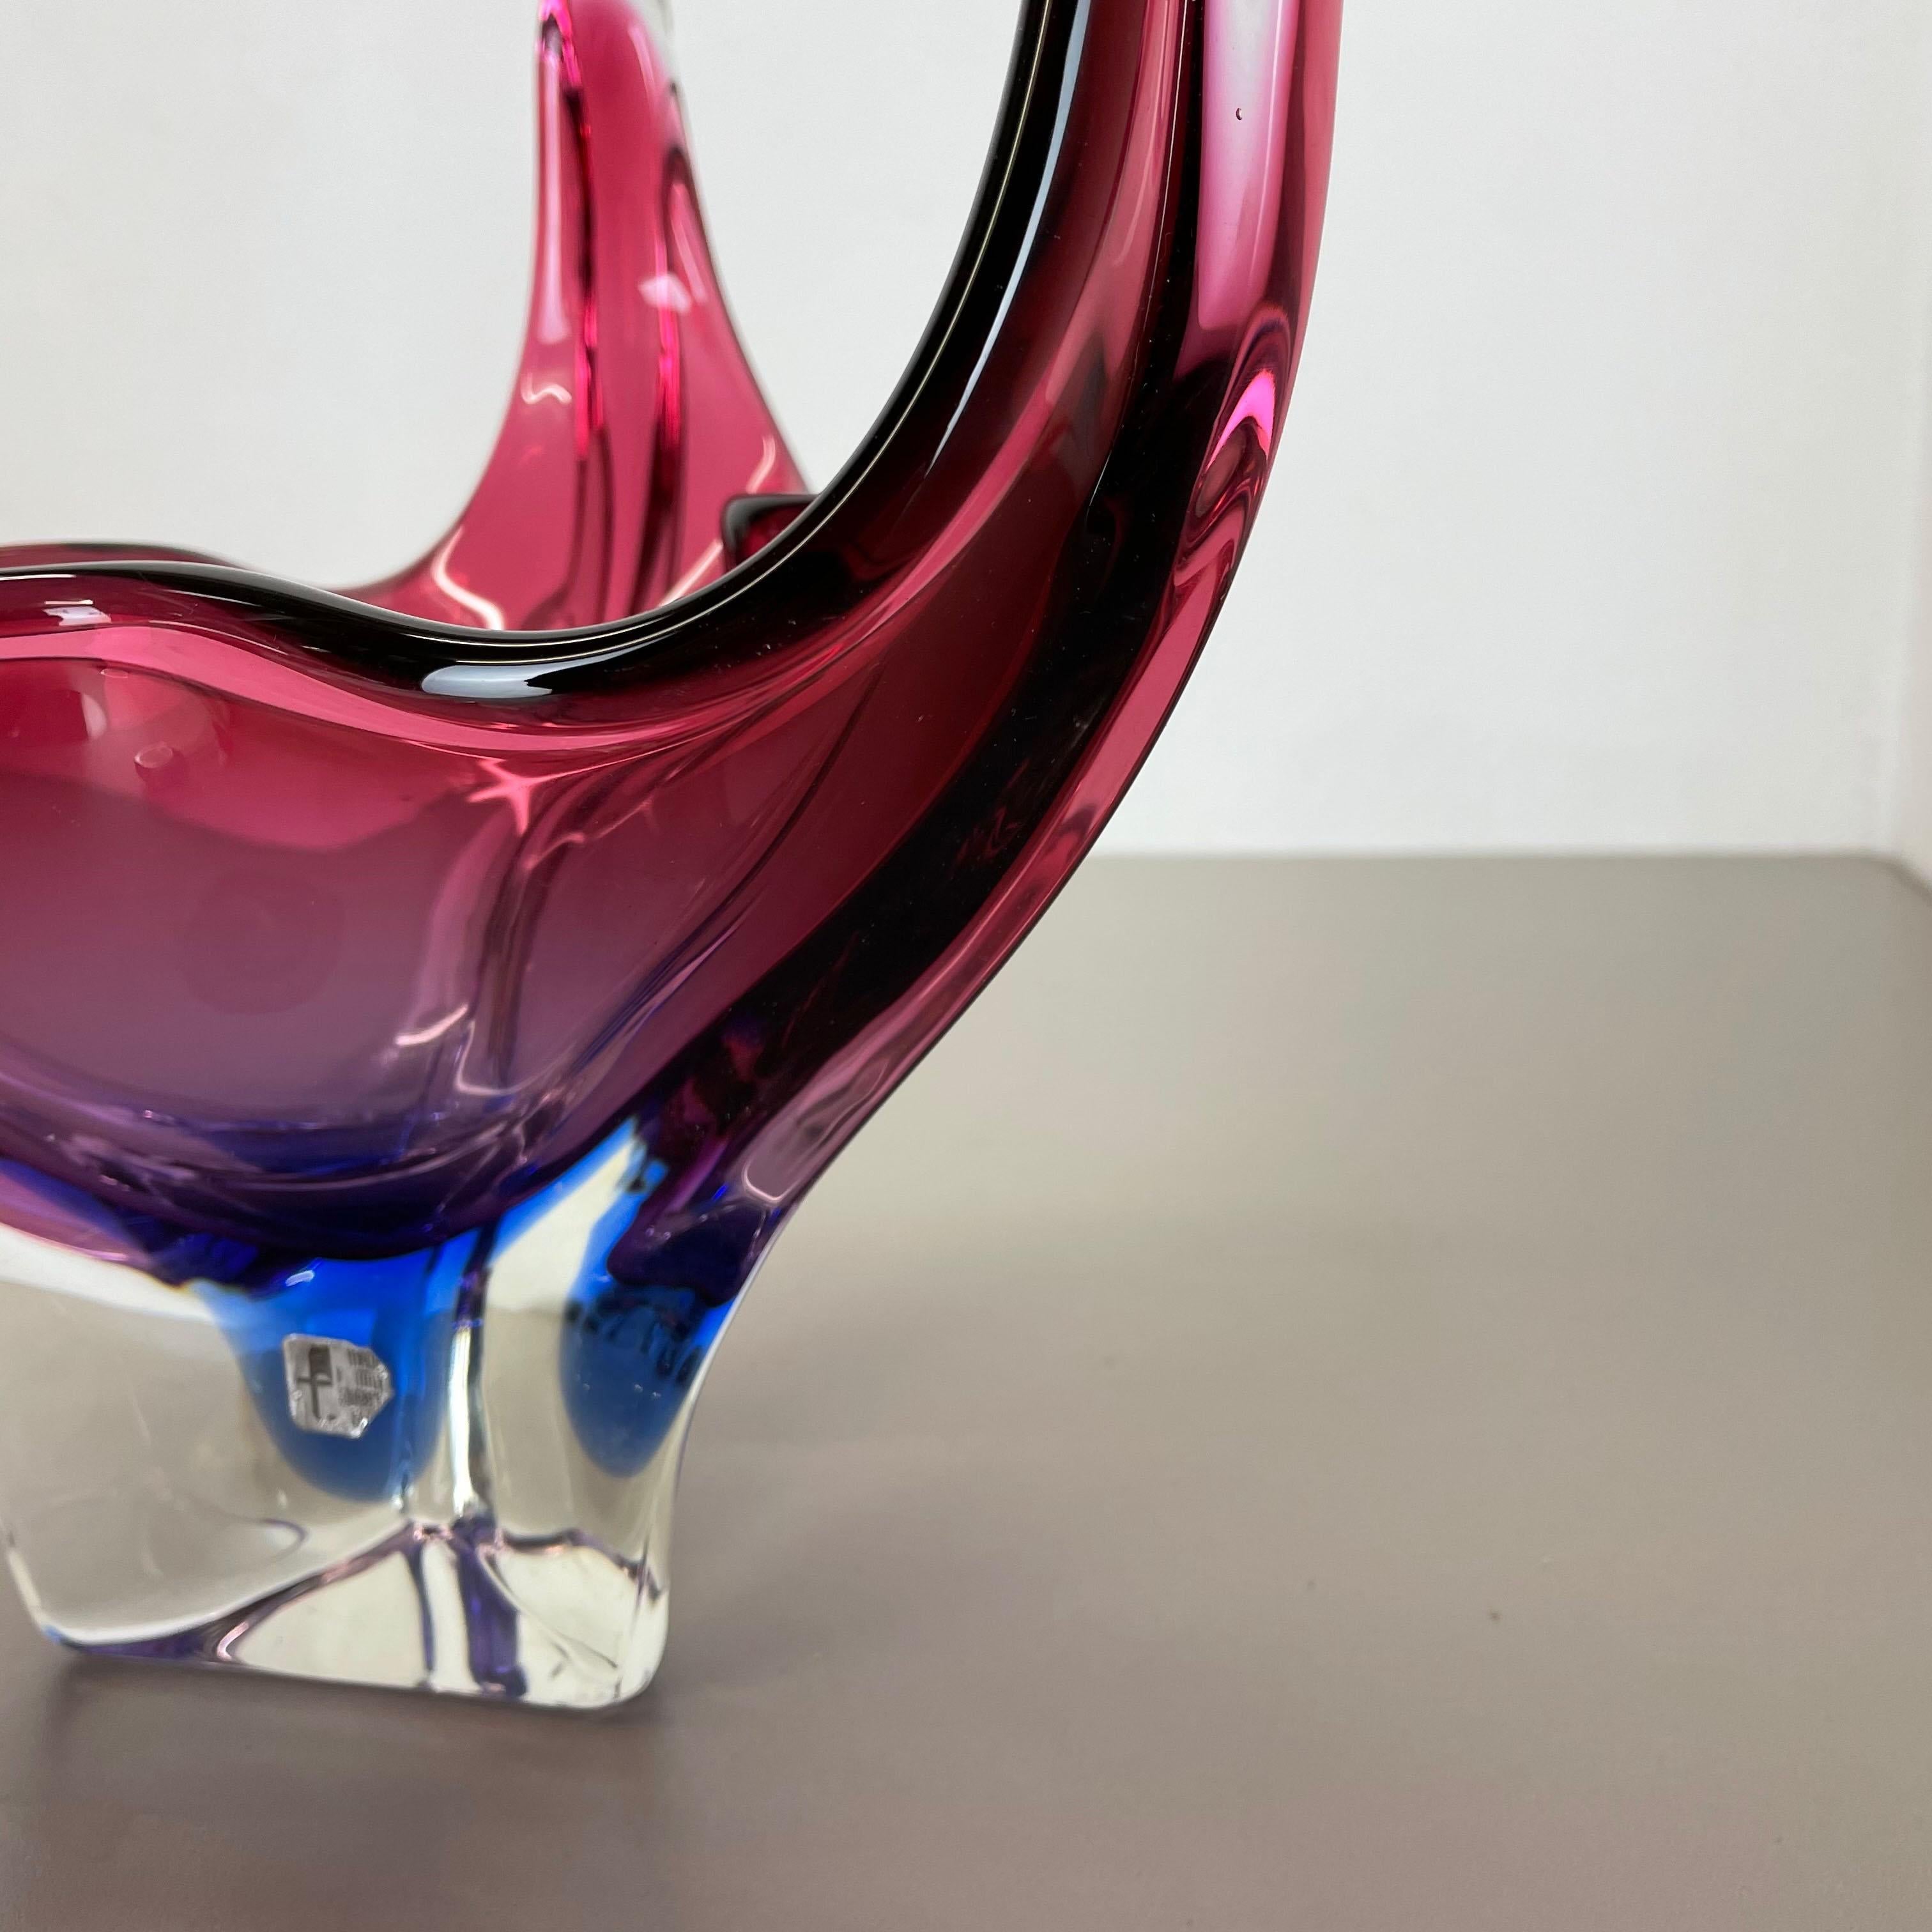 2, 5 Kg Floral Glass Bowl Shell Centerpiece by Fratelli Toso Murano, Italy, 1970s For Sale 10